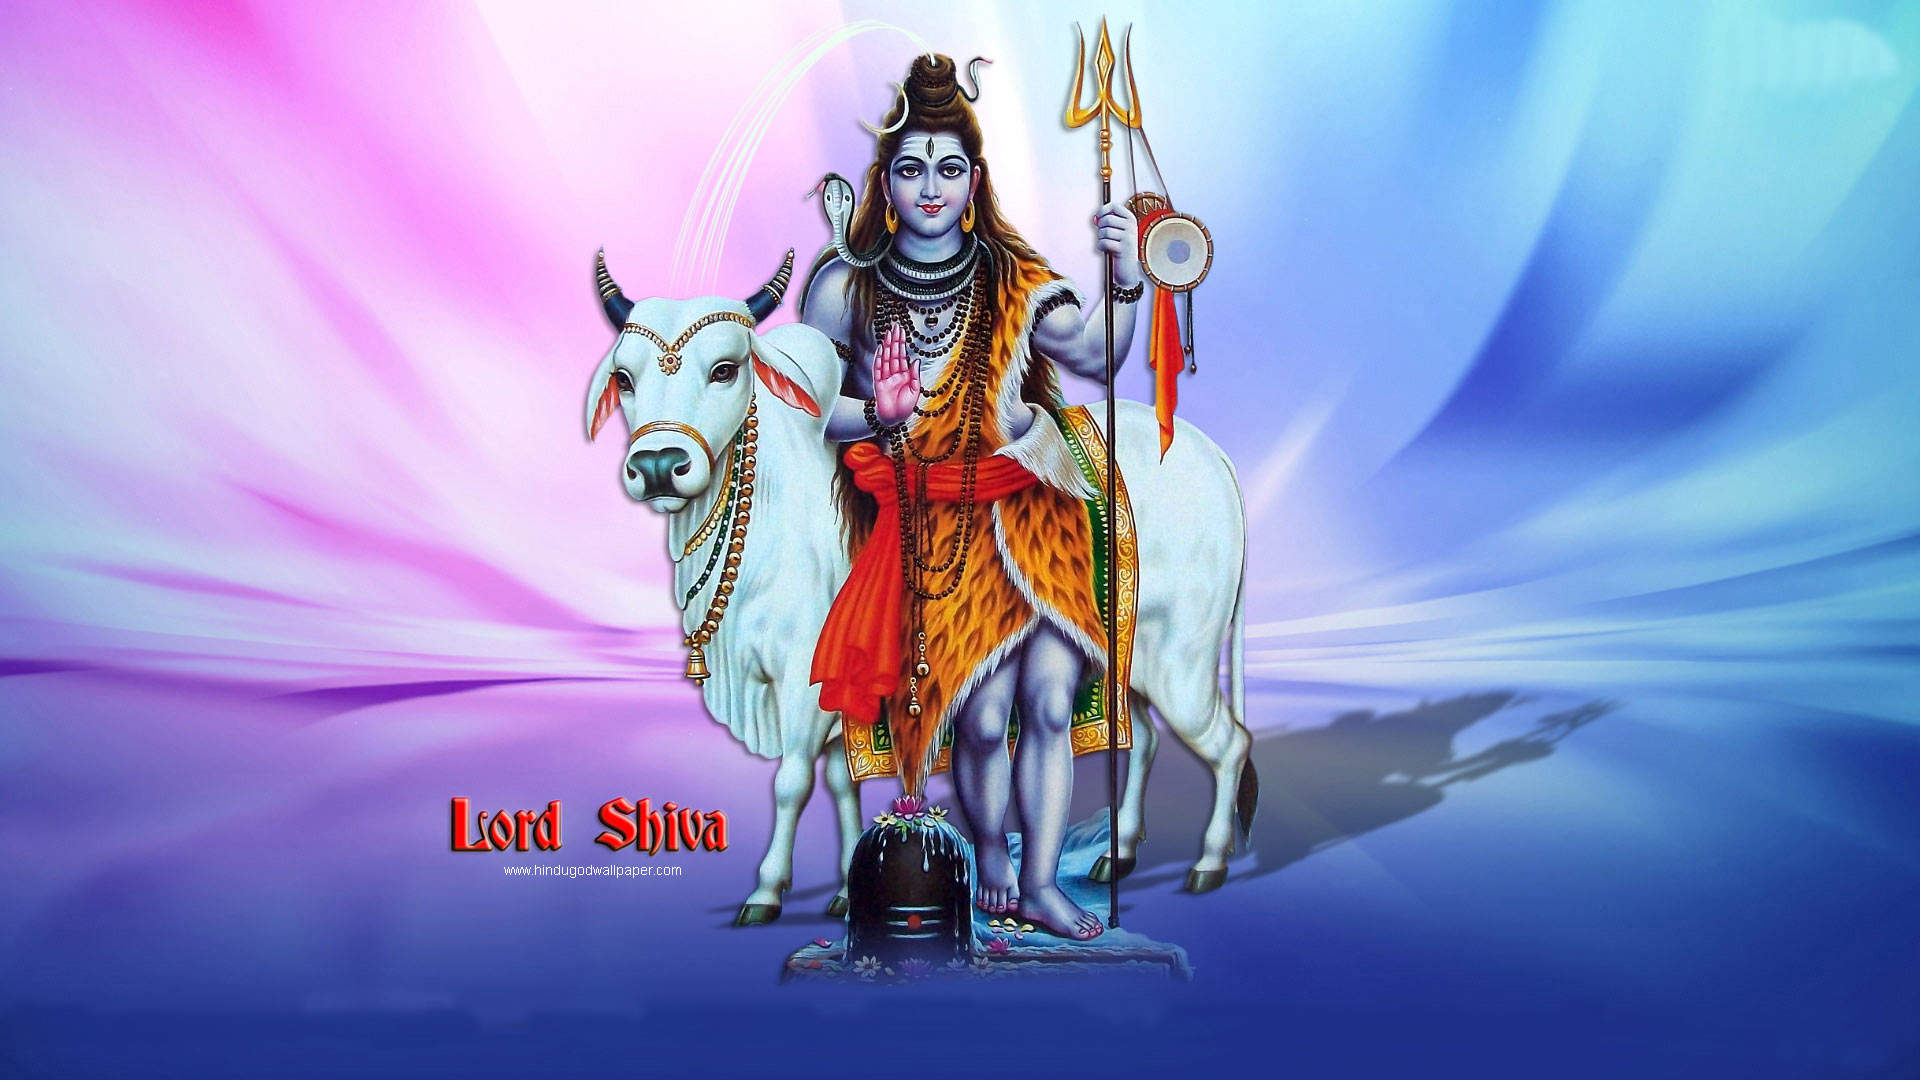 The Lord Shiva Deviantart Gallery HD Wallpaper Car Pictures